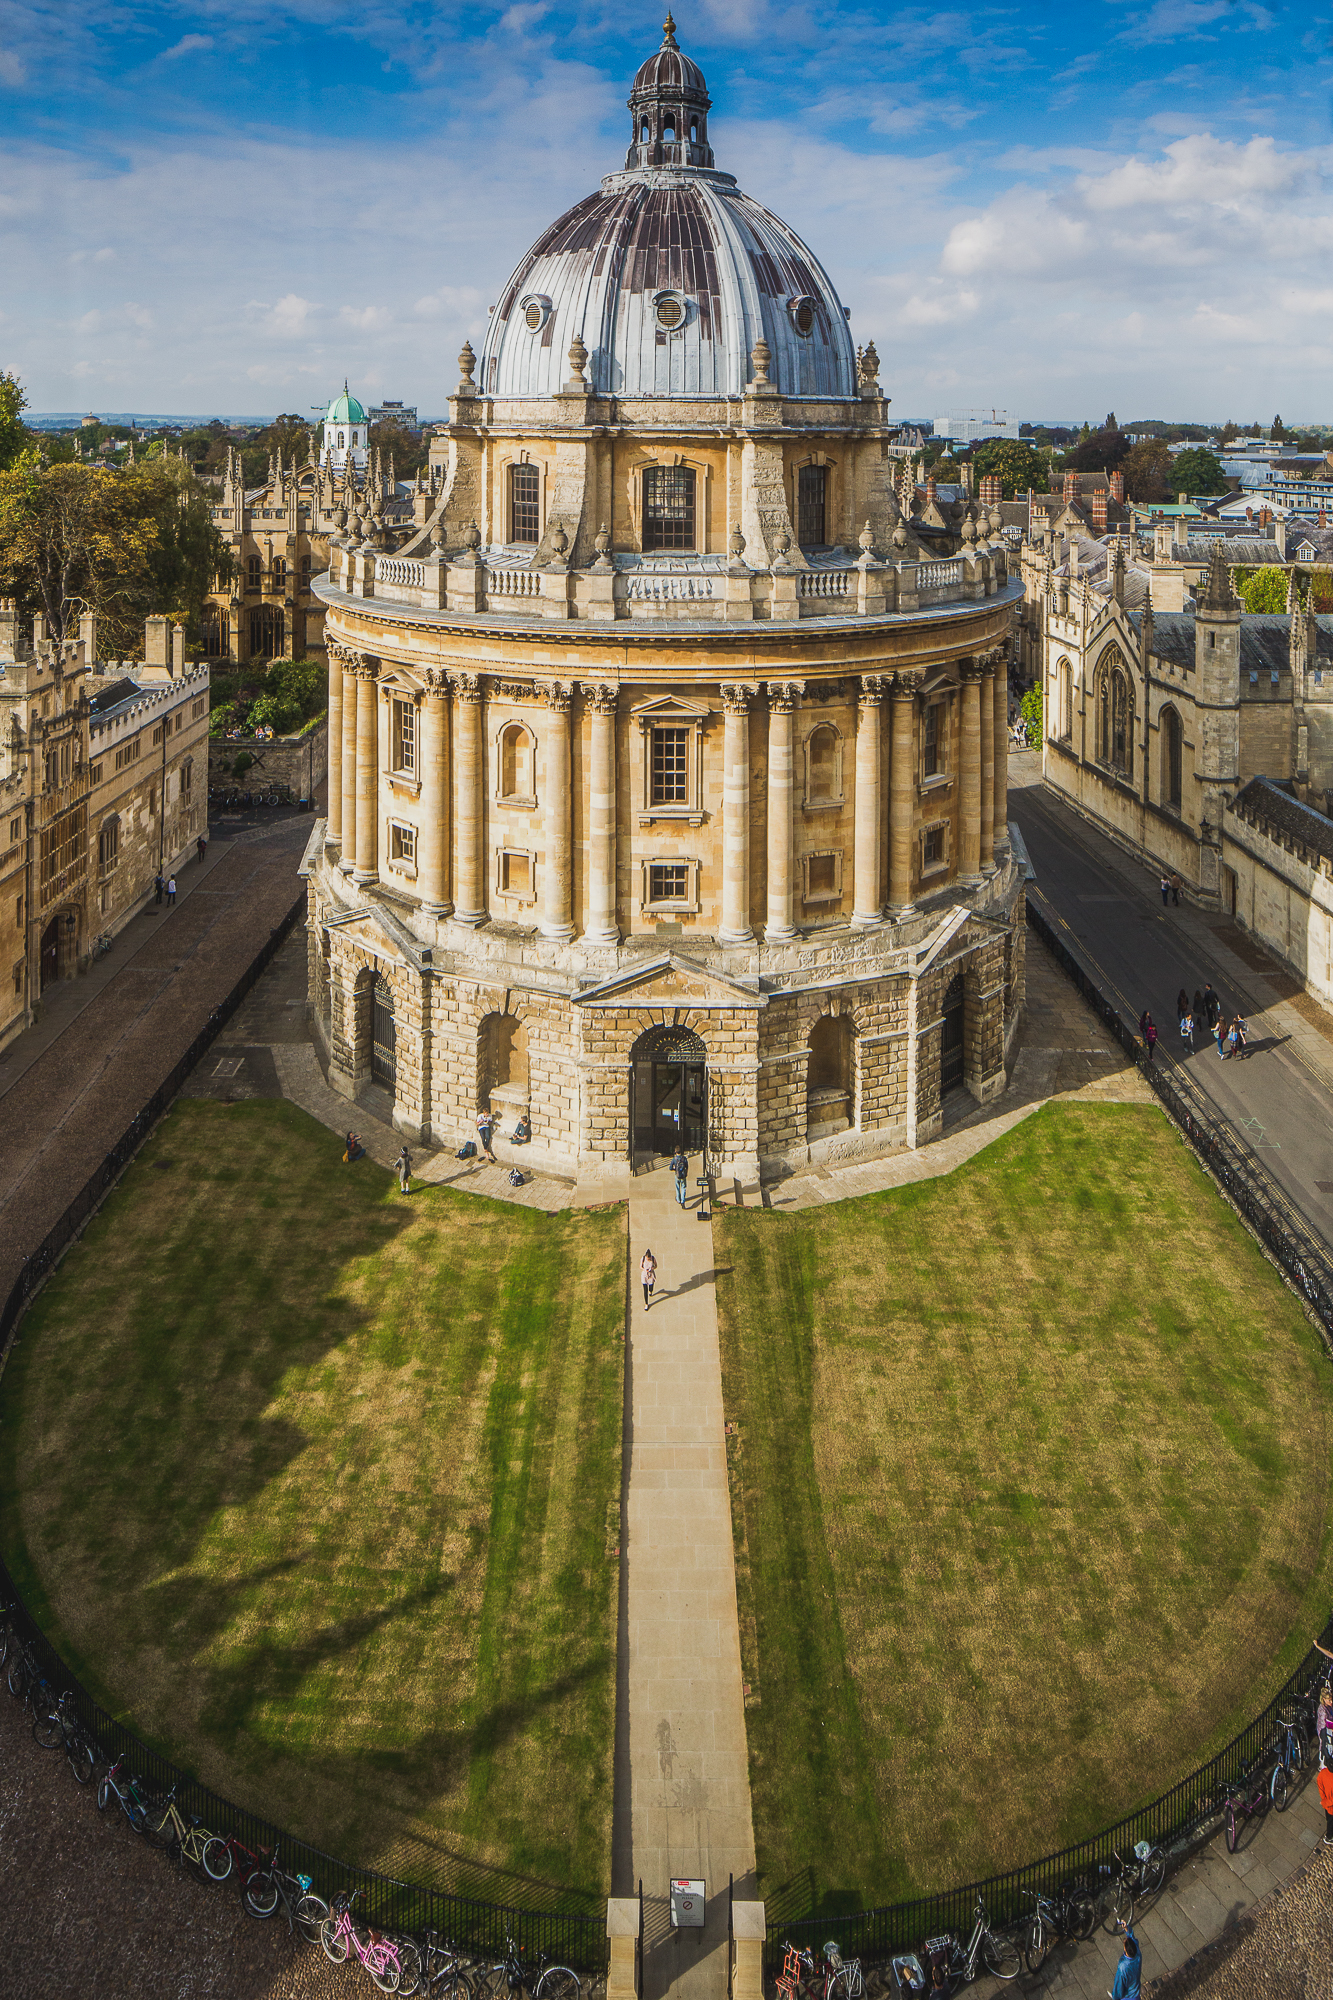 A view of Radcliffe Camera